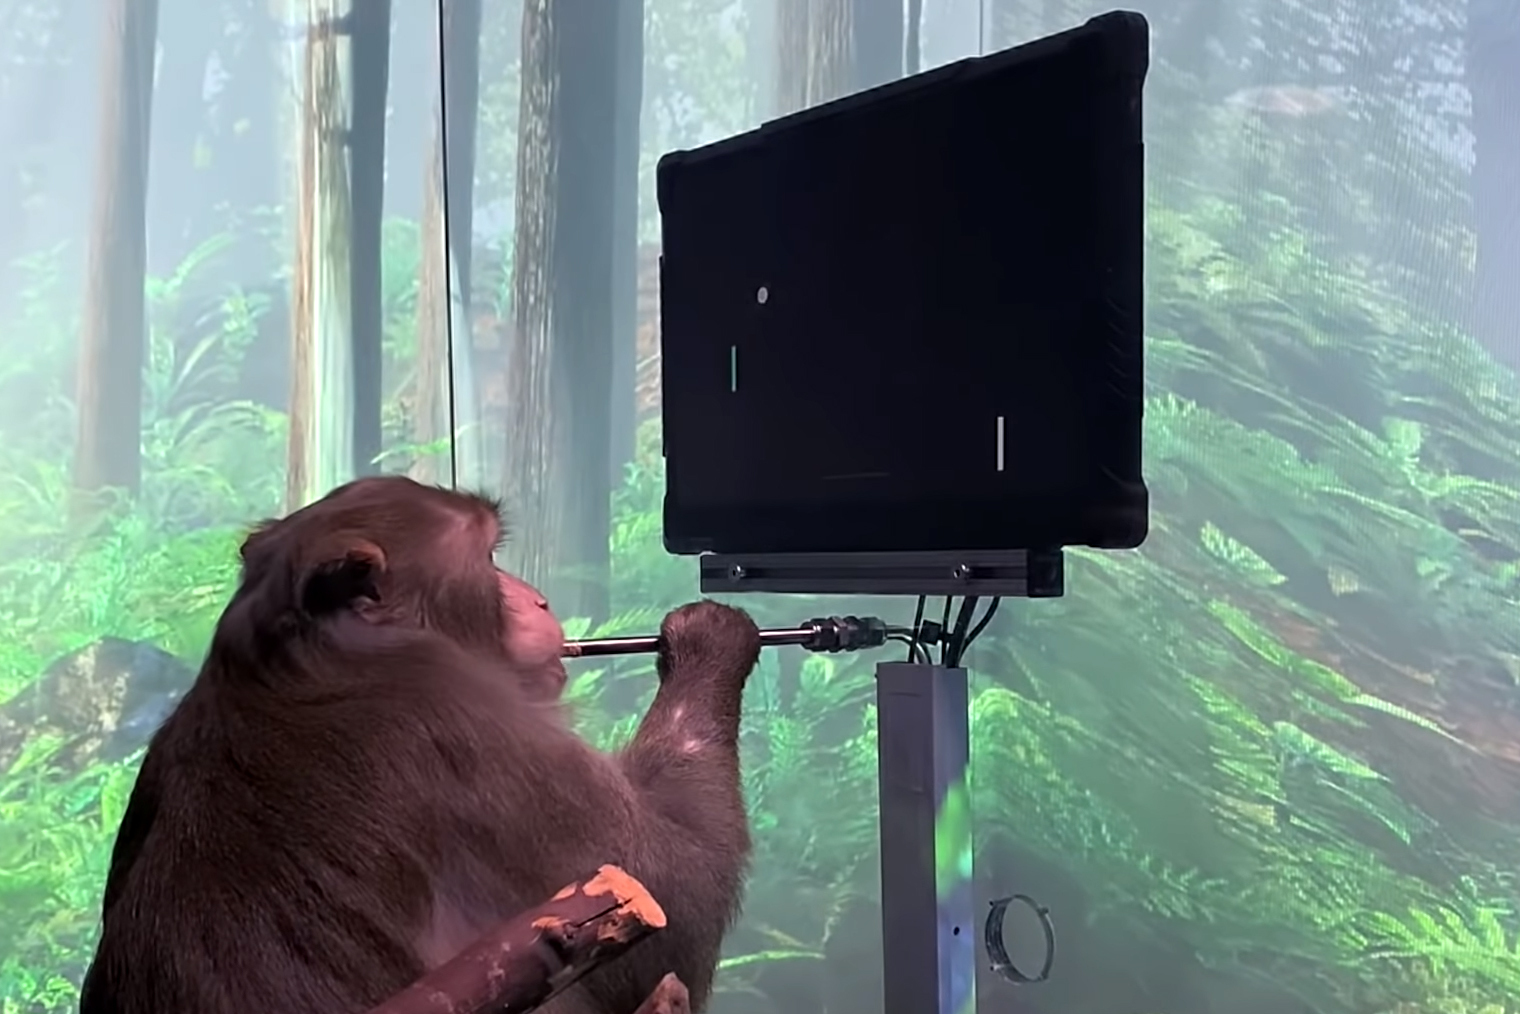 Elon Musk’s company releases video of monkey playing video games with its mind